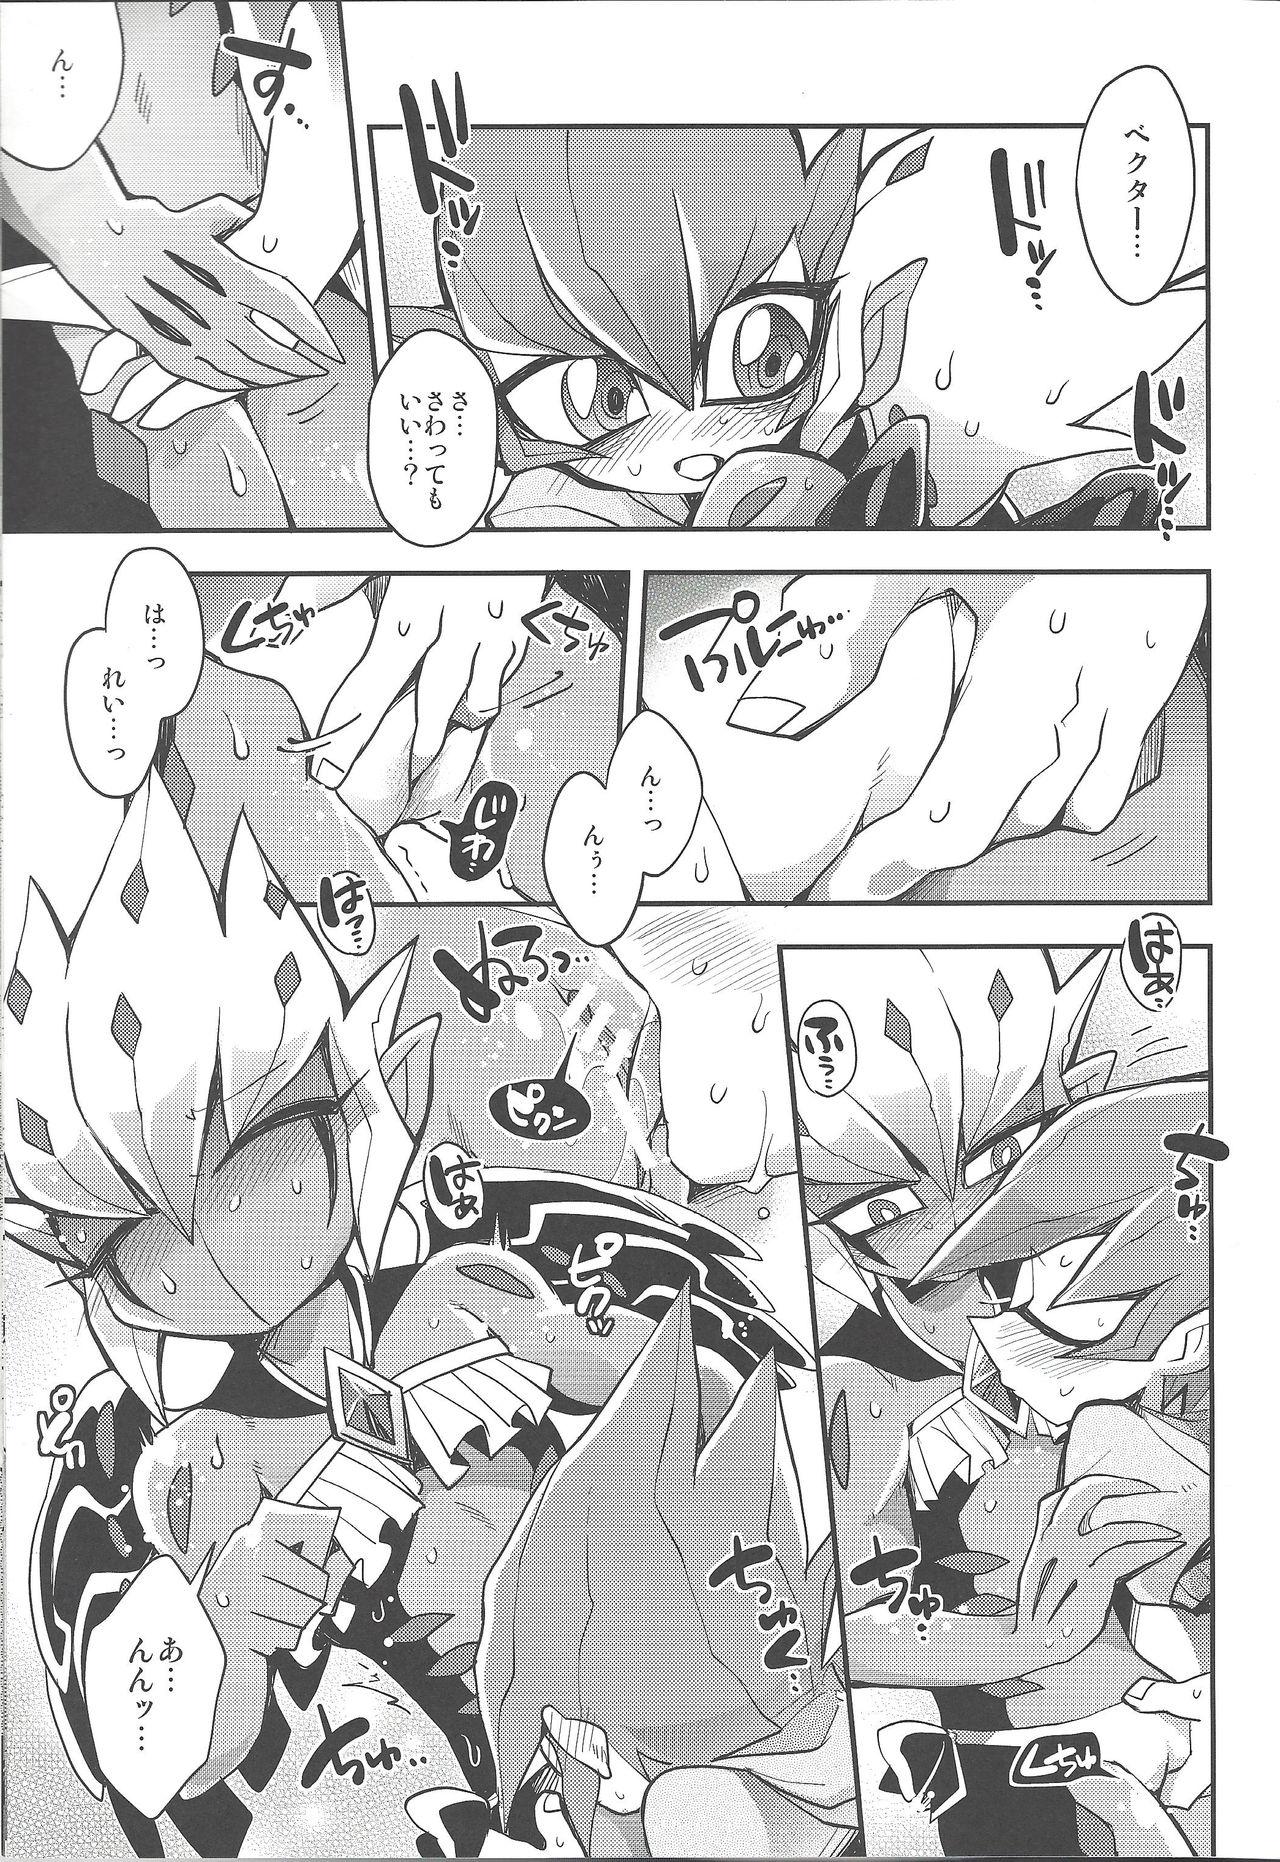 Old Young XXXX no Vec-chan 3 - Yu gi oh zexal Nude - Page 12